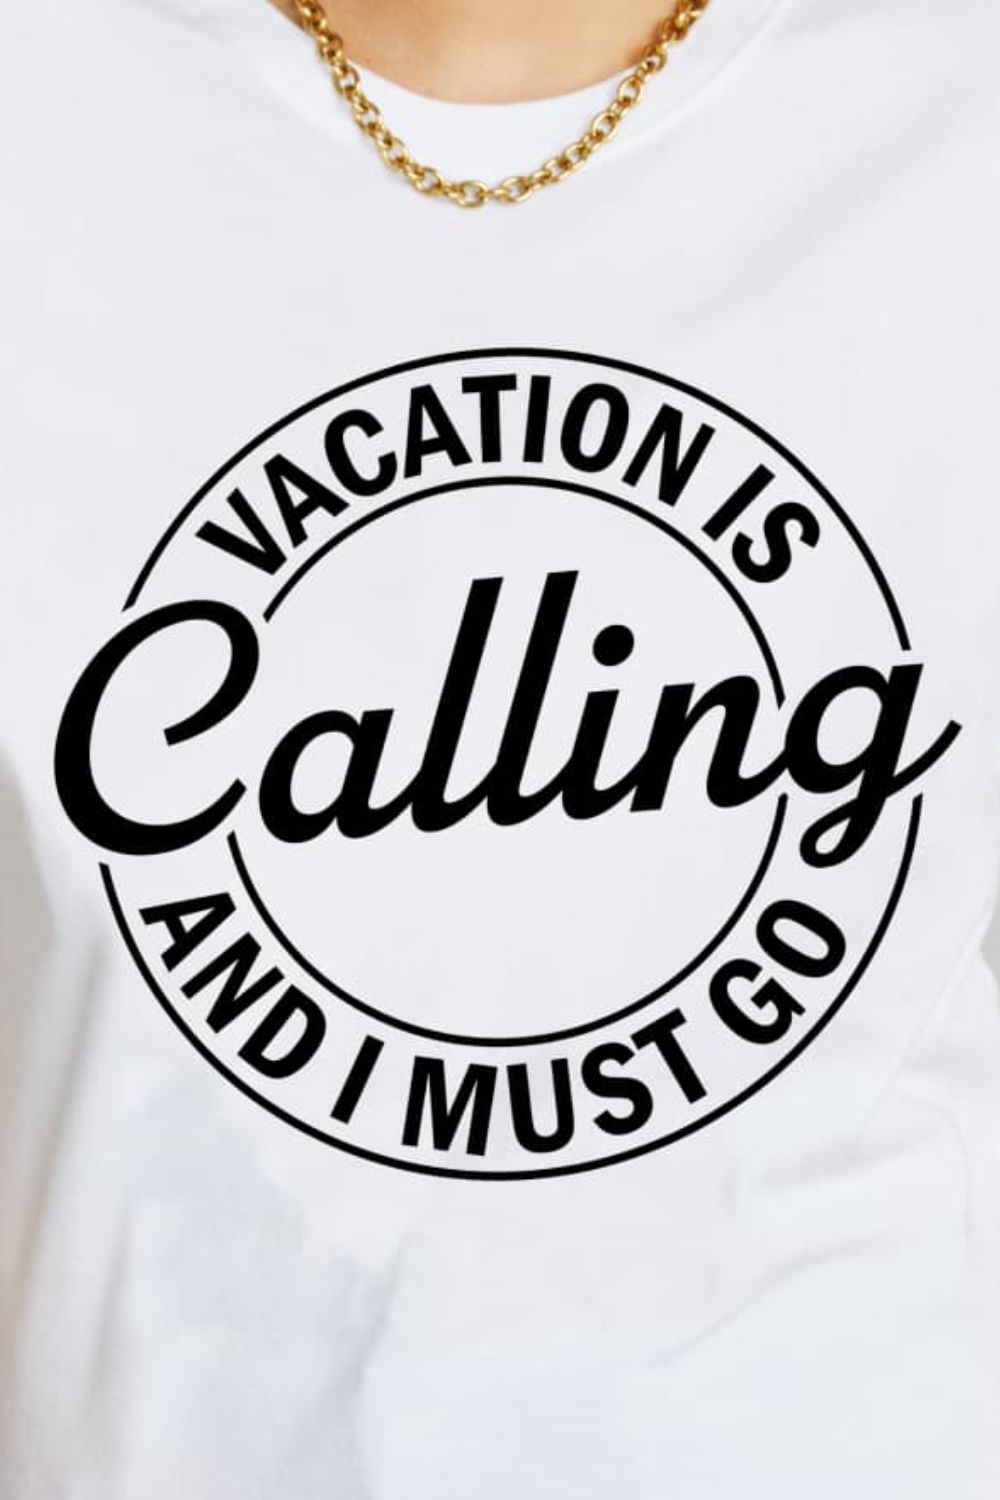 VACATION IS CALLING AND I MUST GO Graphic Cotton T-Shirt